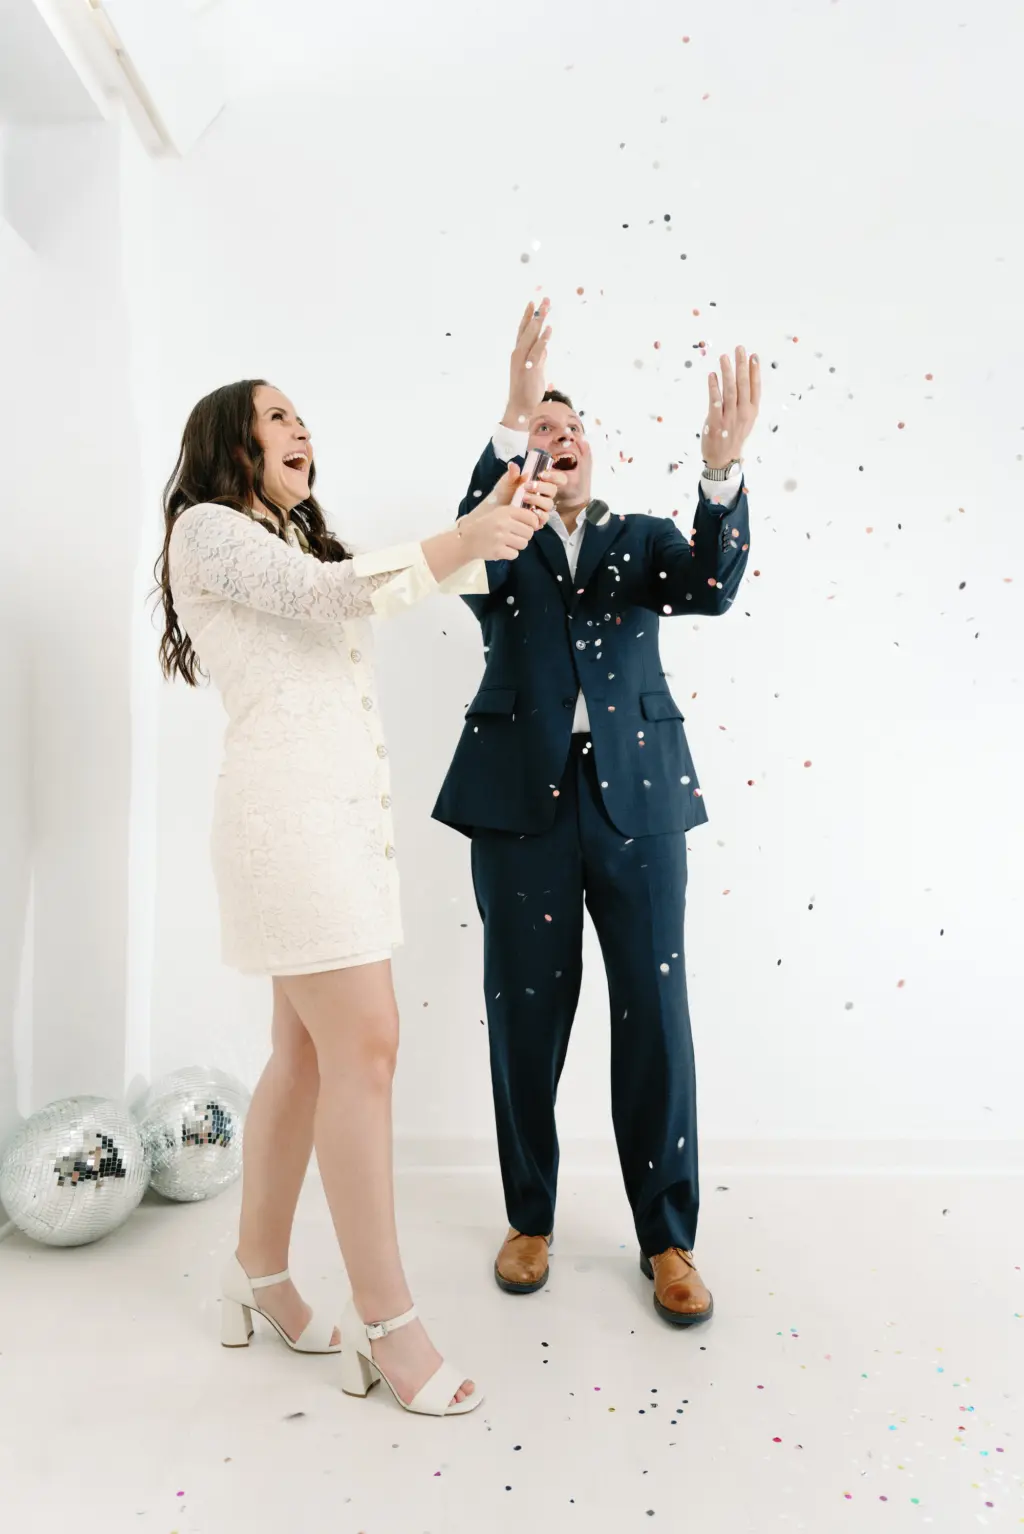 Modern Moody Engagement Shoot | Tampa Bay Wedding Photographer Dewitt for Love Photography